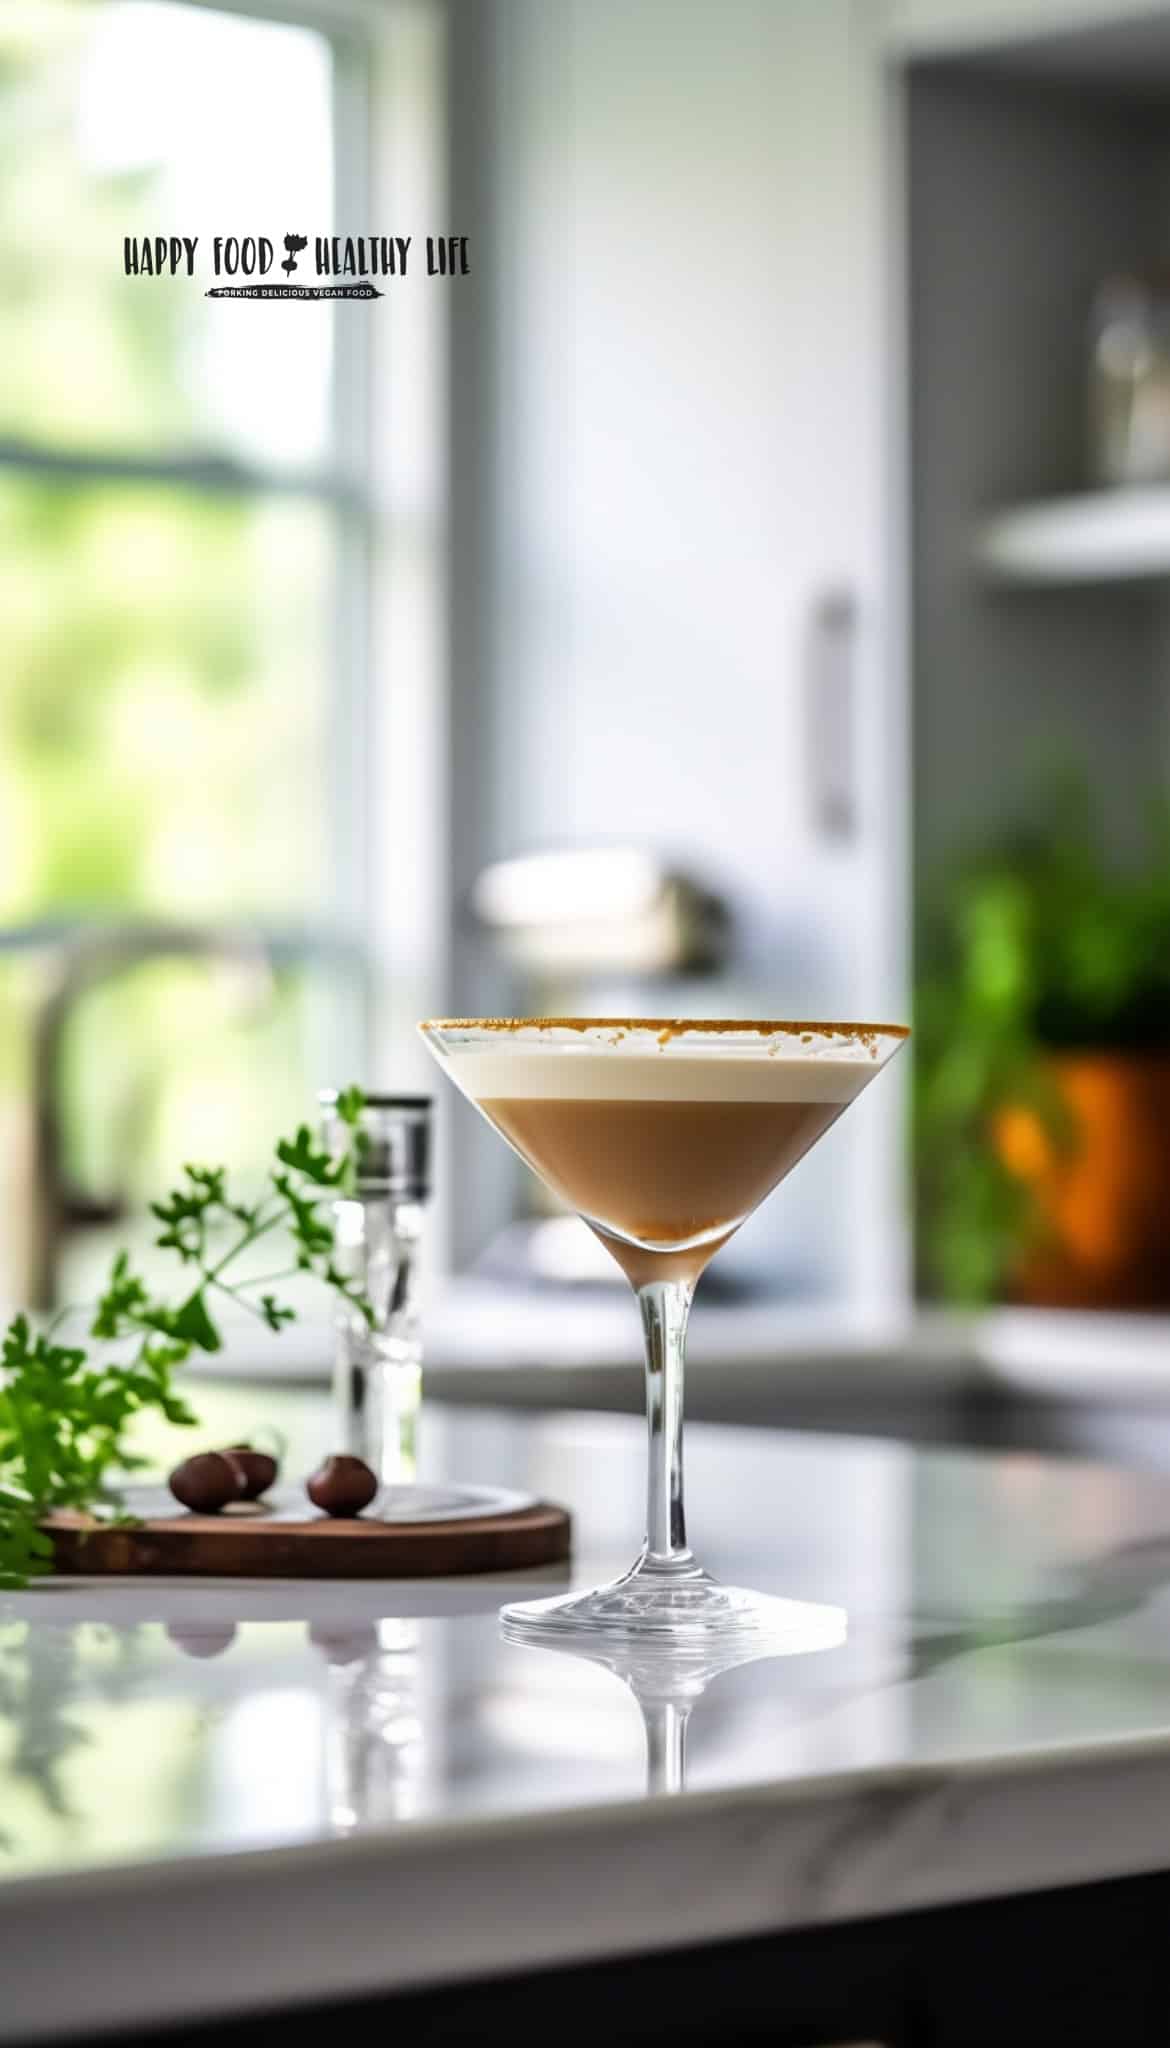 martini glass full of brown and white liquid on a white counter top in a kitchen that is light and bright, you can see a window and greenery in background
